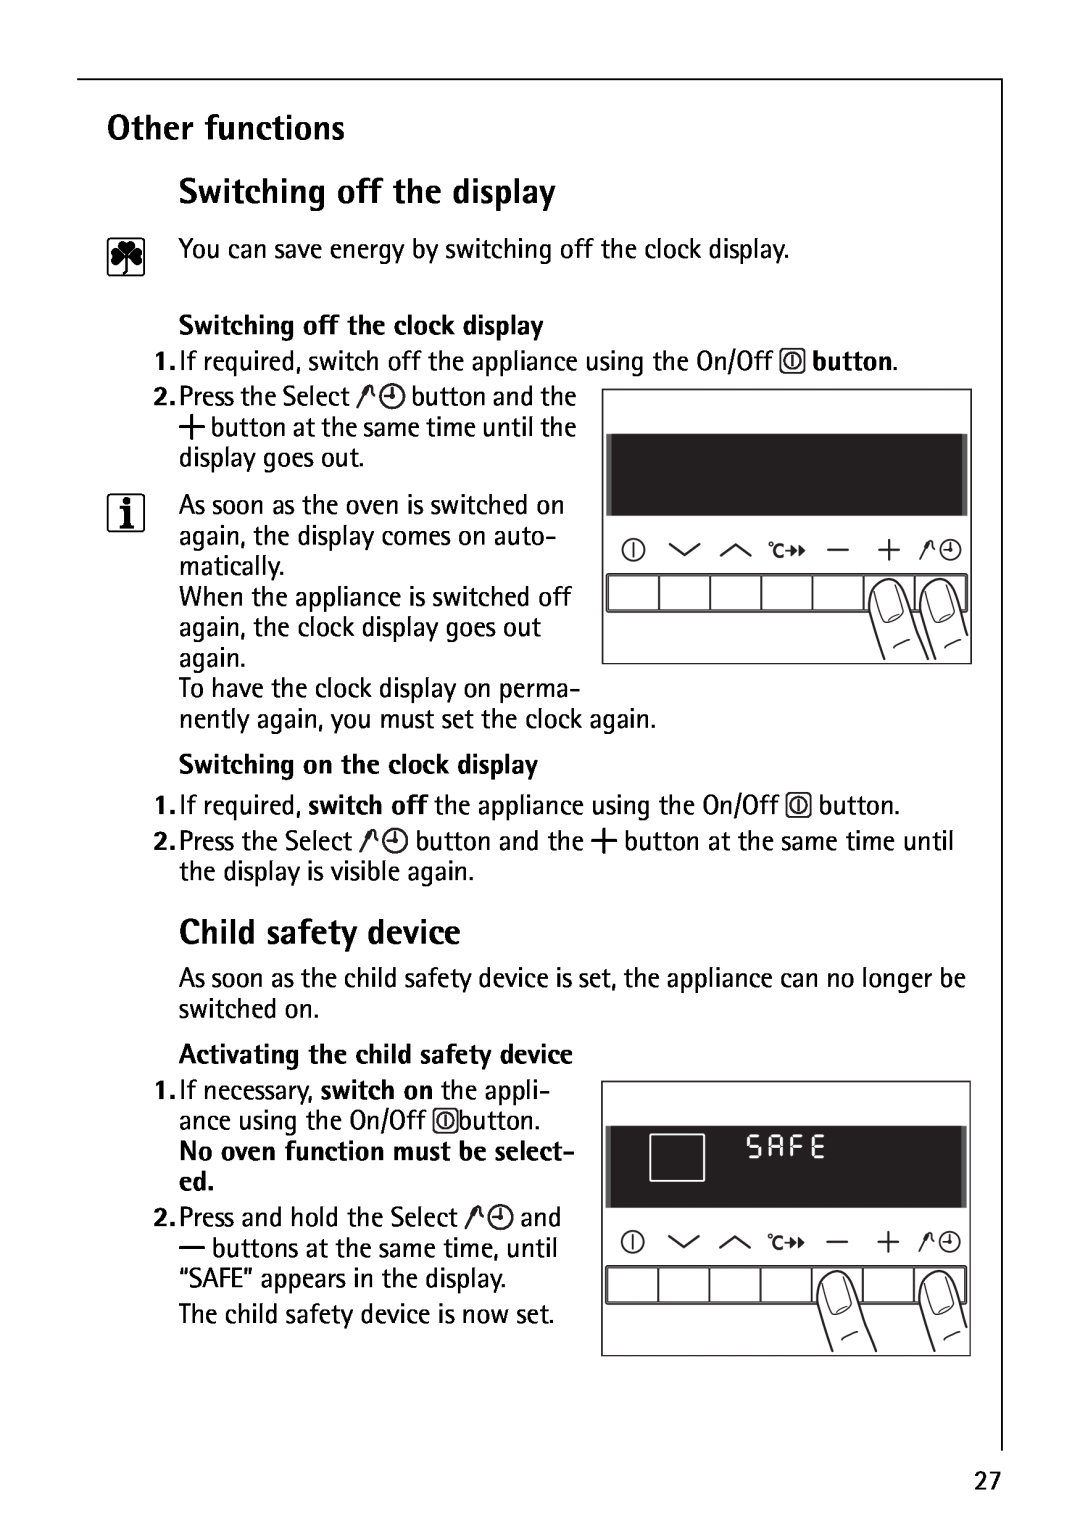 Electrolux B8871-4 manual Other functions Switching off the display, Child safety device, Switching off the clock display 